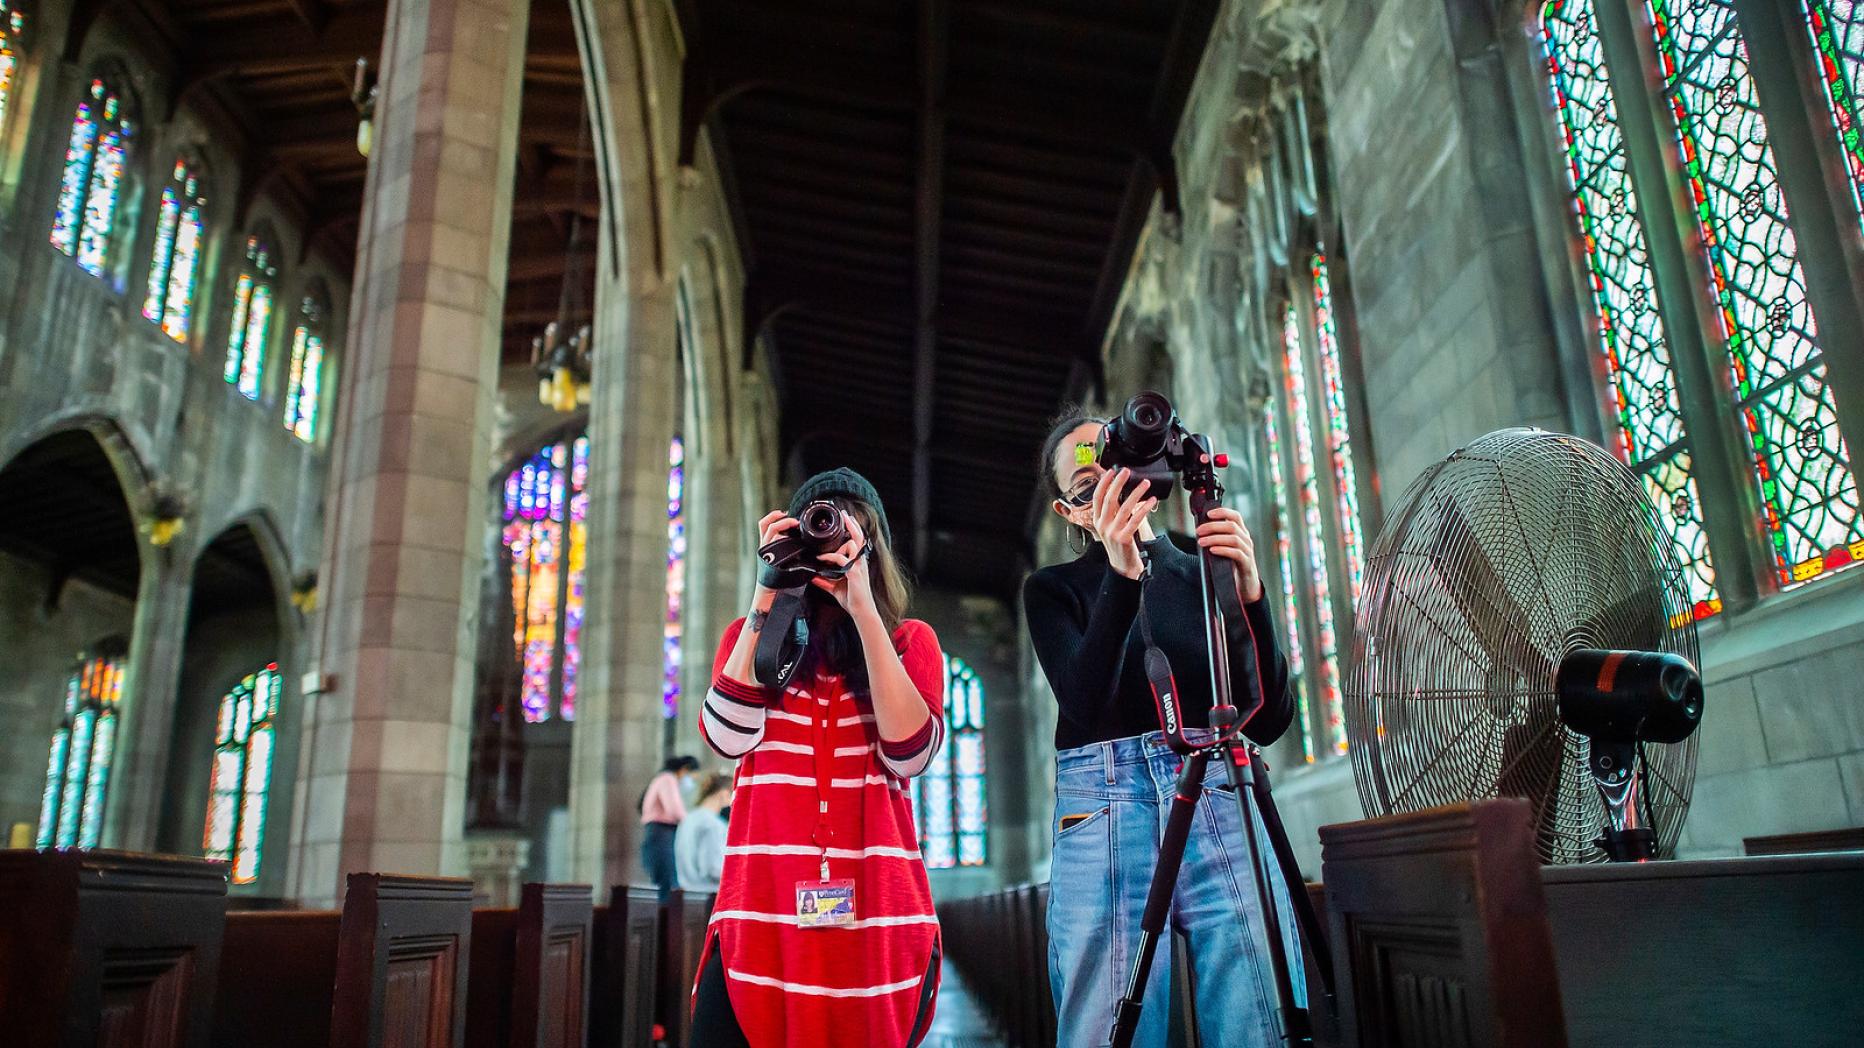 Students Carly Adler and Hillary Morales Robles photograph and document the interior of Holy Apostles and the Mediator Episcopal Church (HAM), a historically African American Parish in West Philadelphia